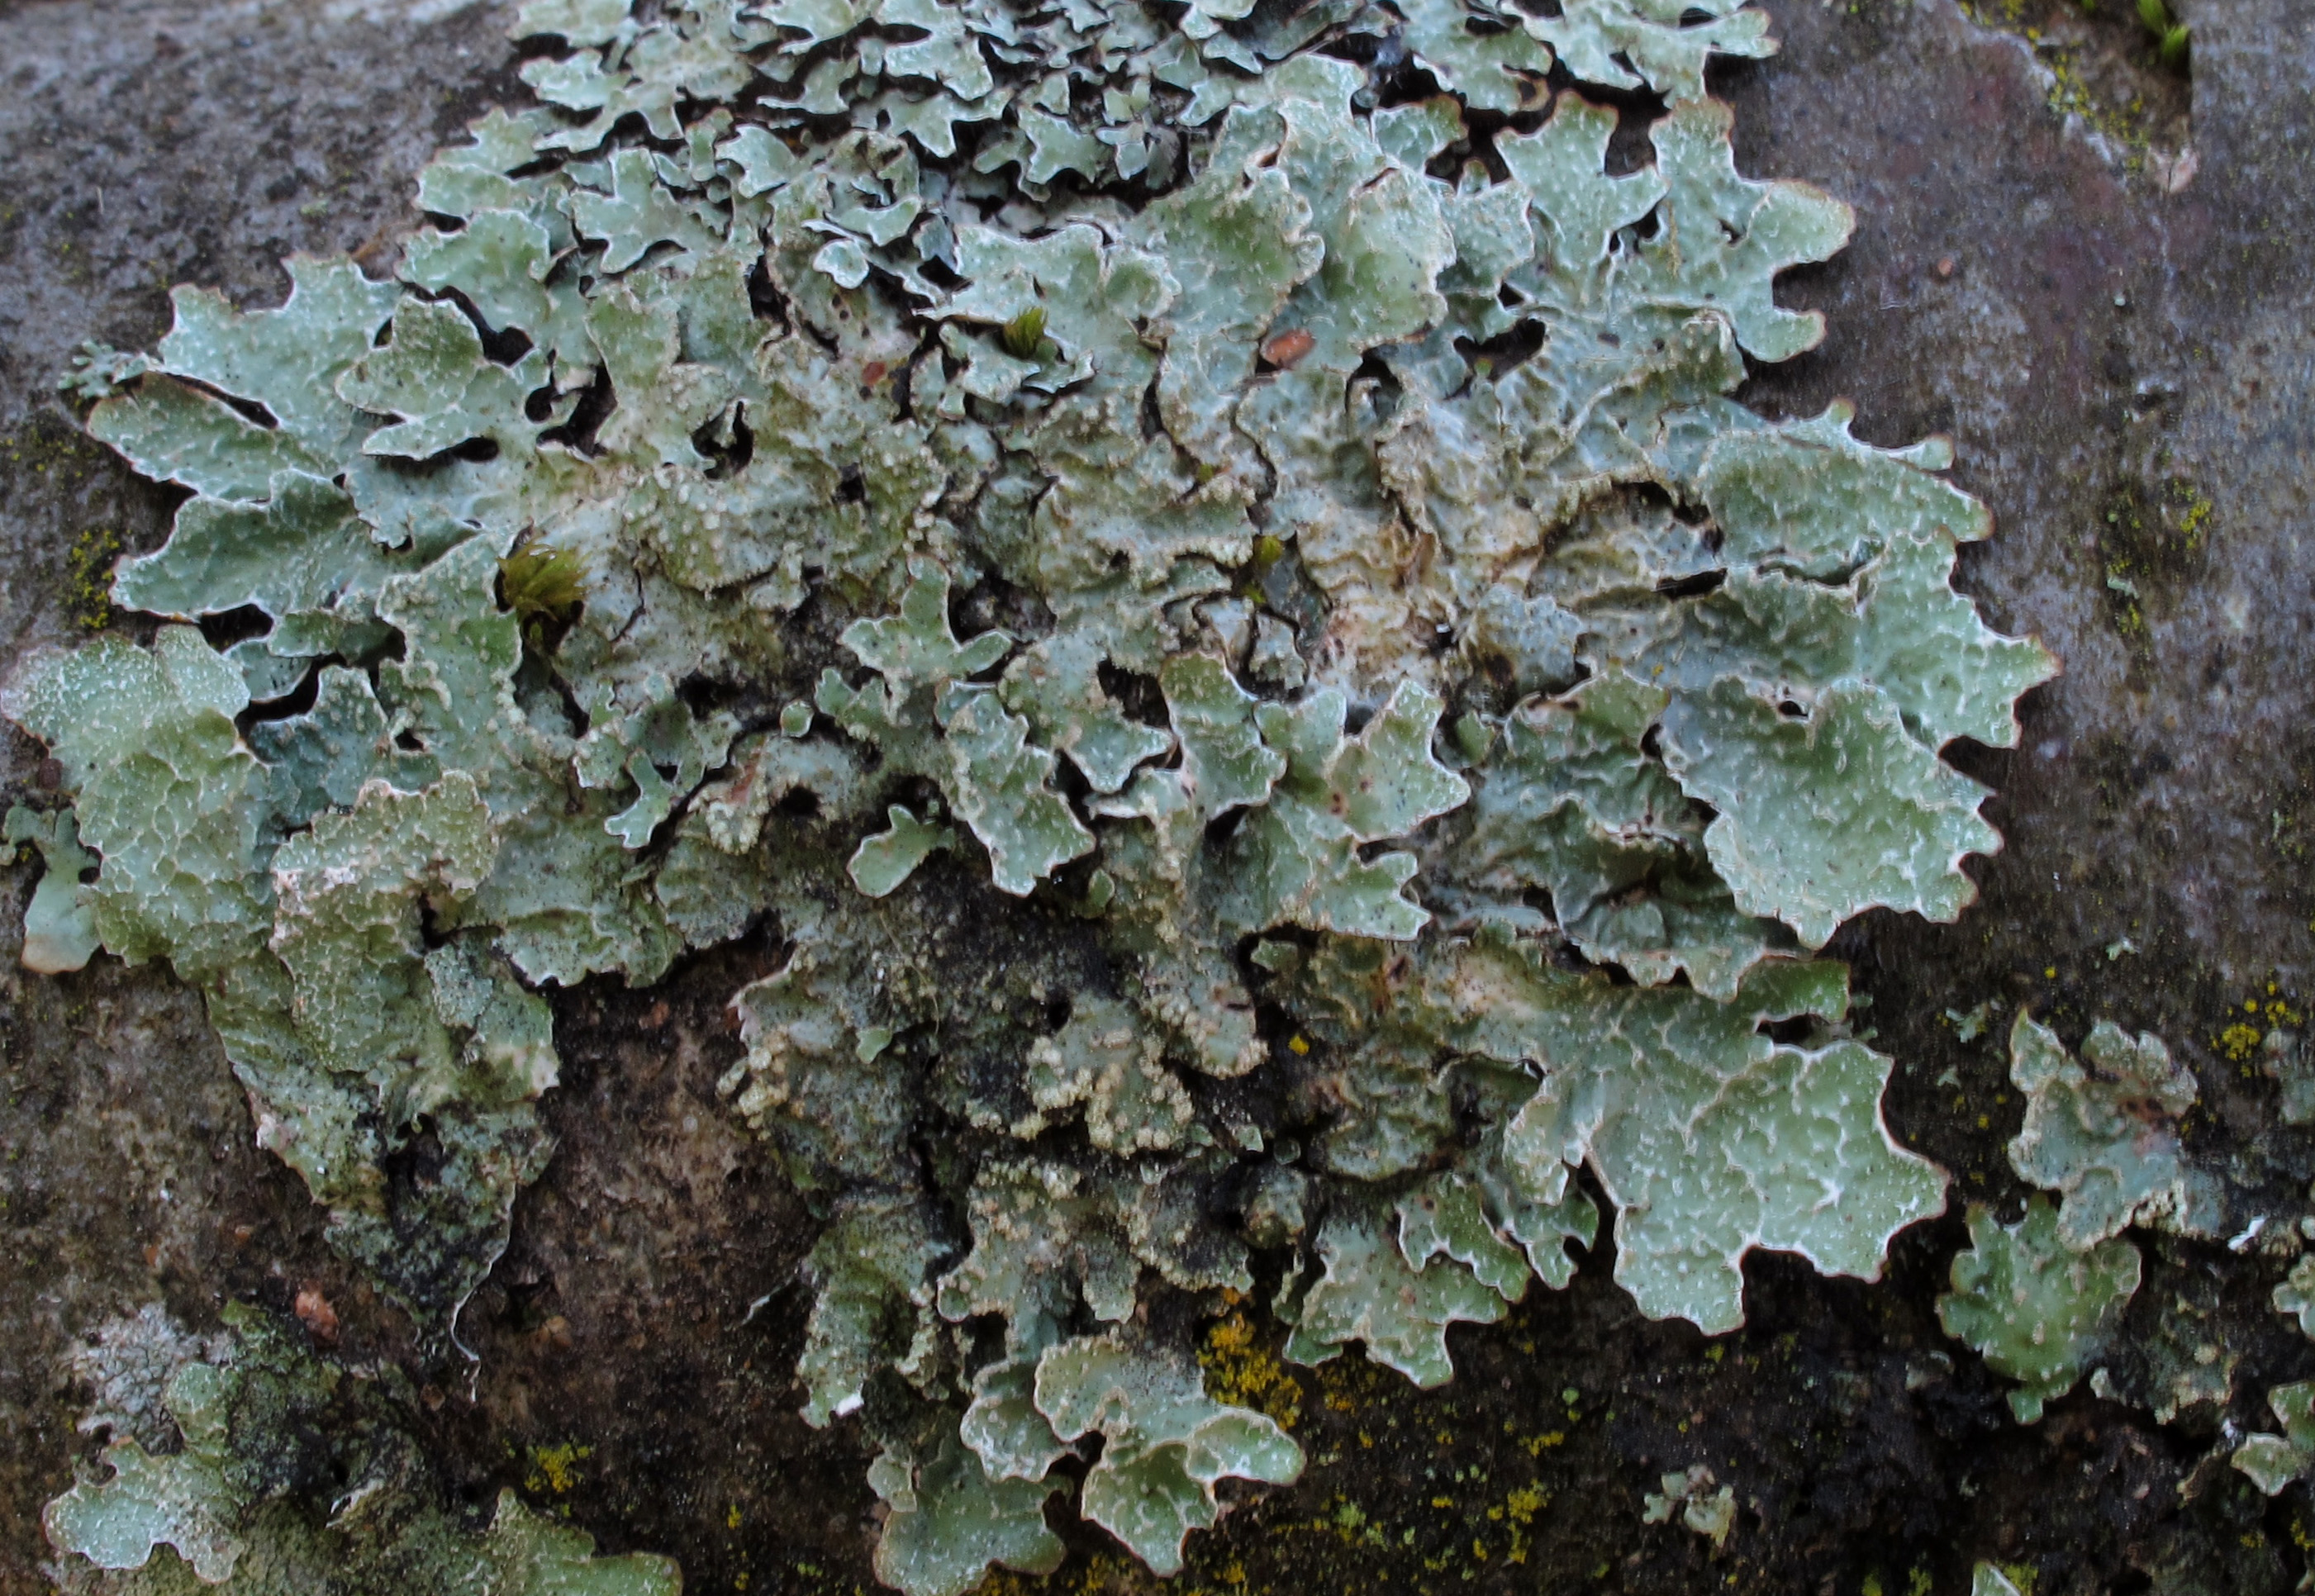 Close-up of a succulent plant with green algae infestation